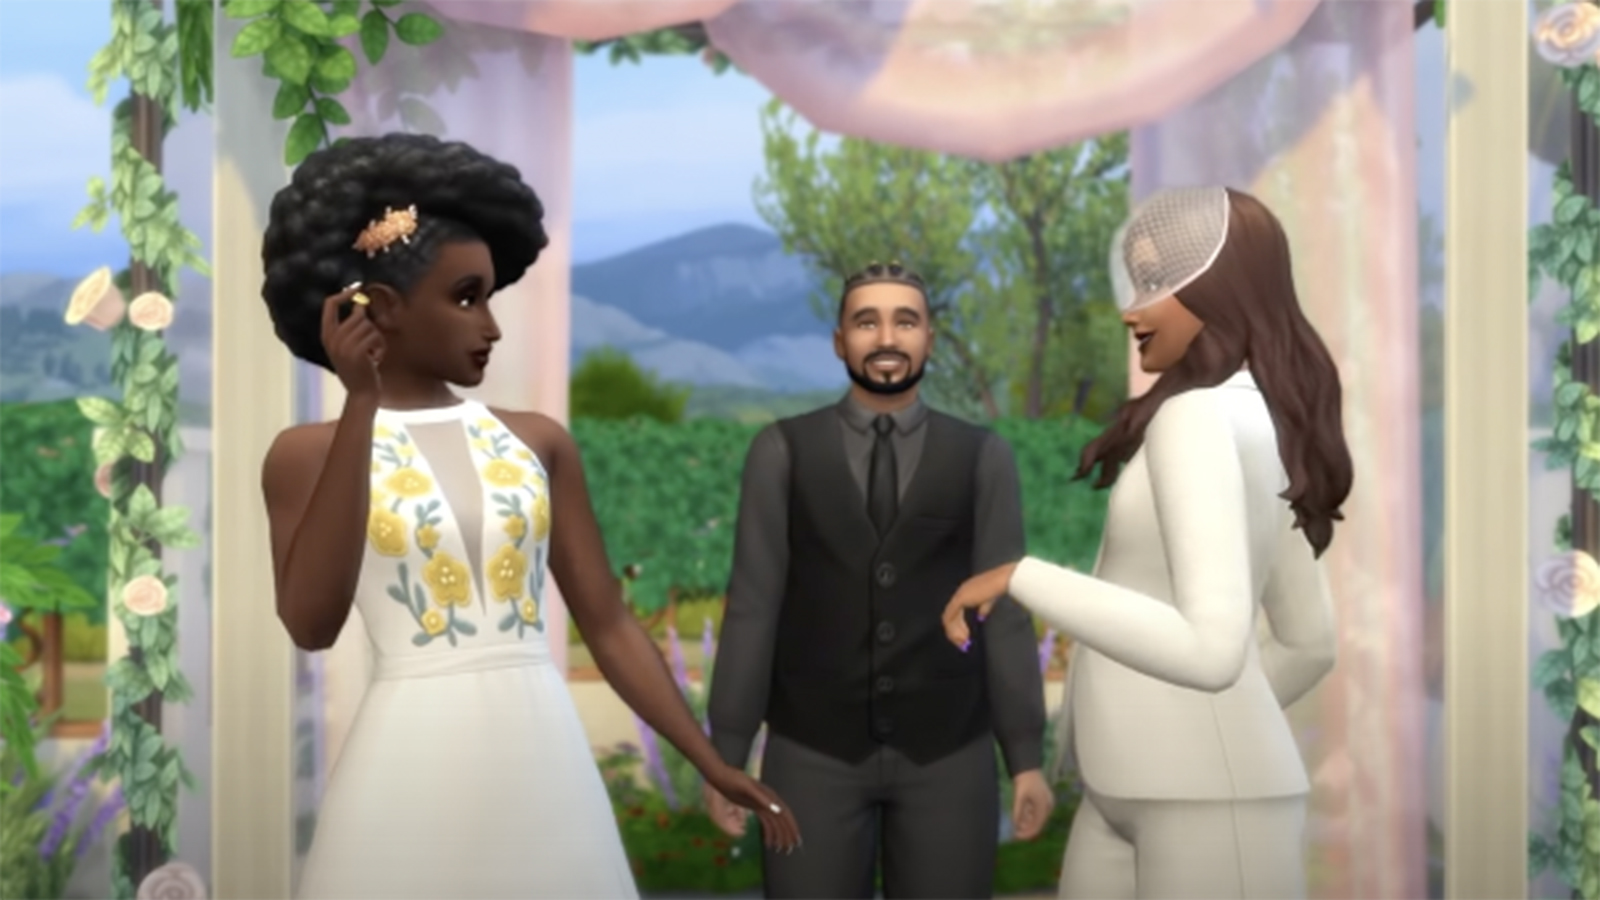   The Sims 4        -